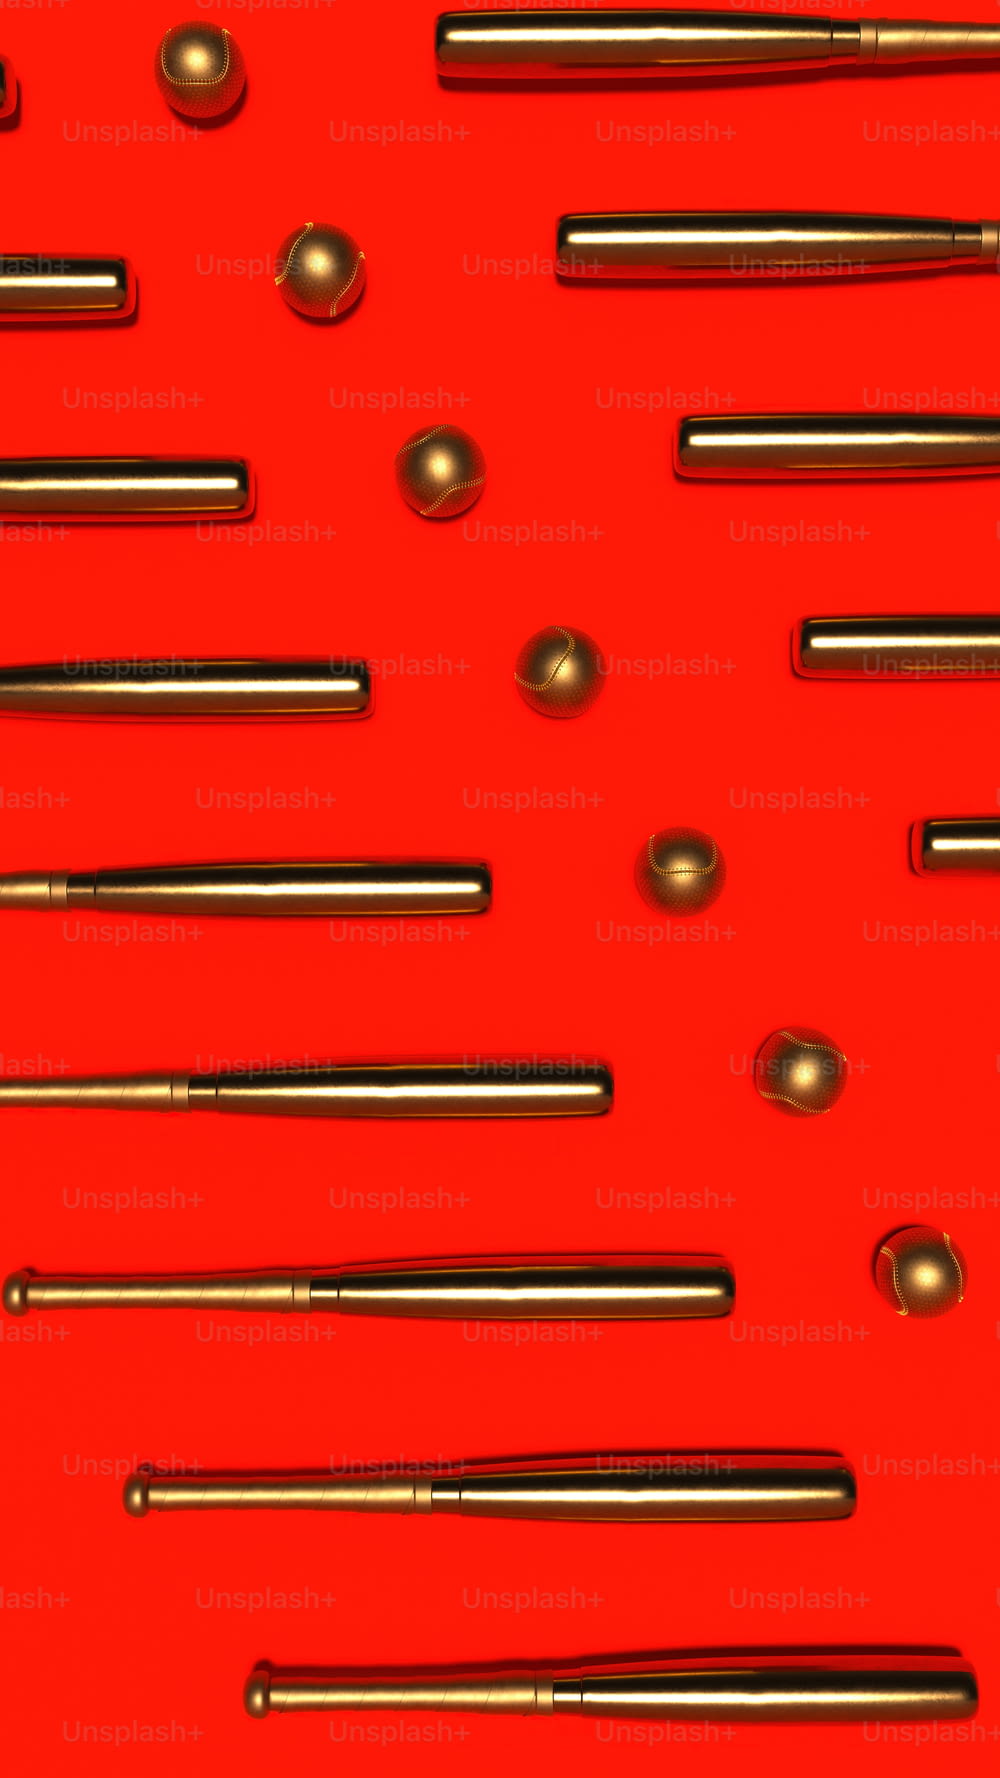 a group of different types of pens on a red surface